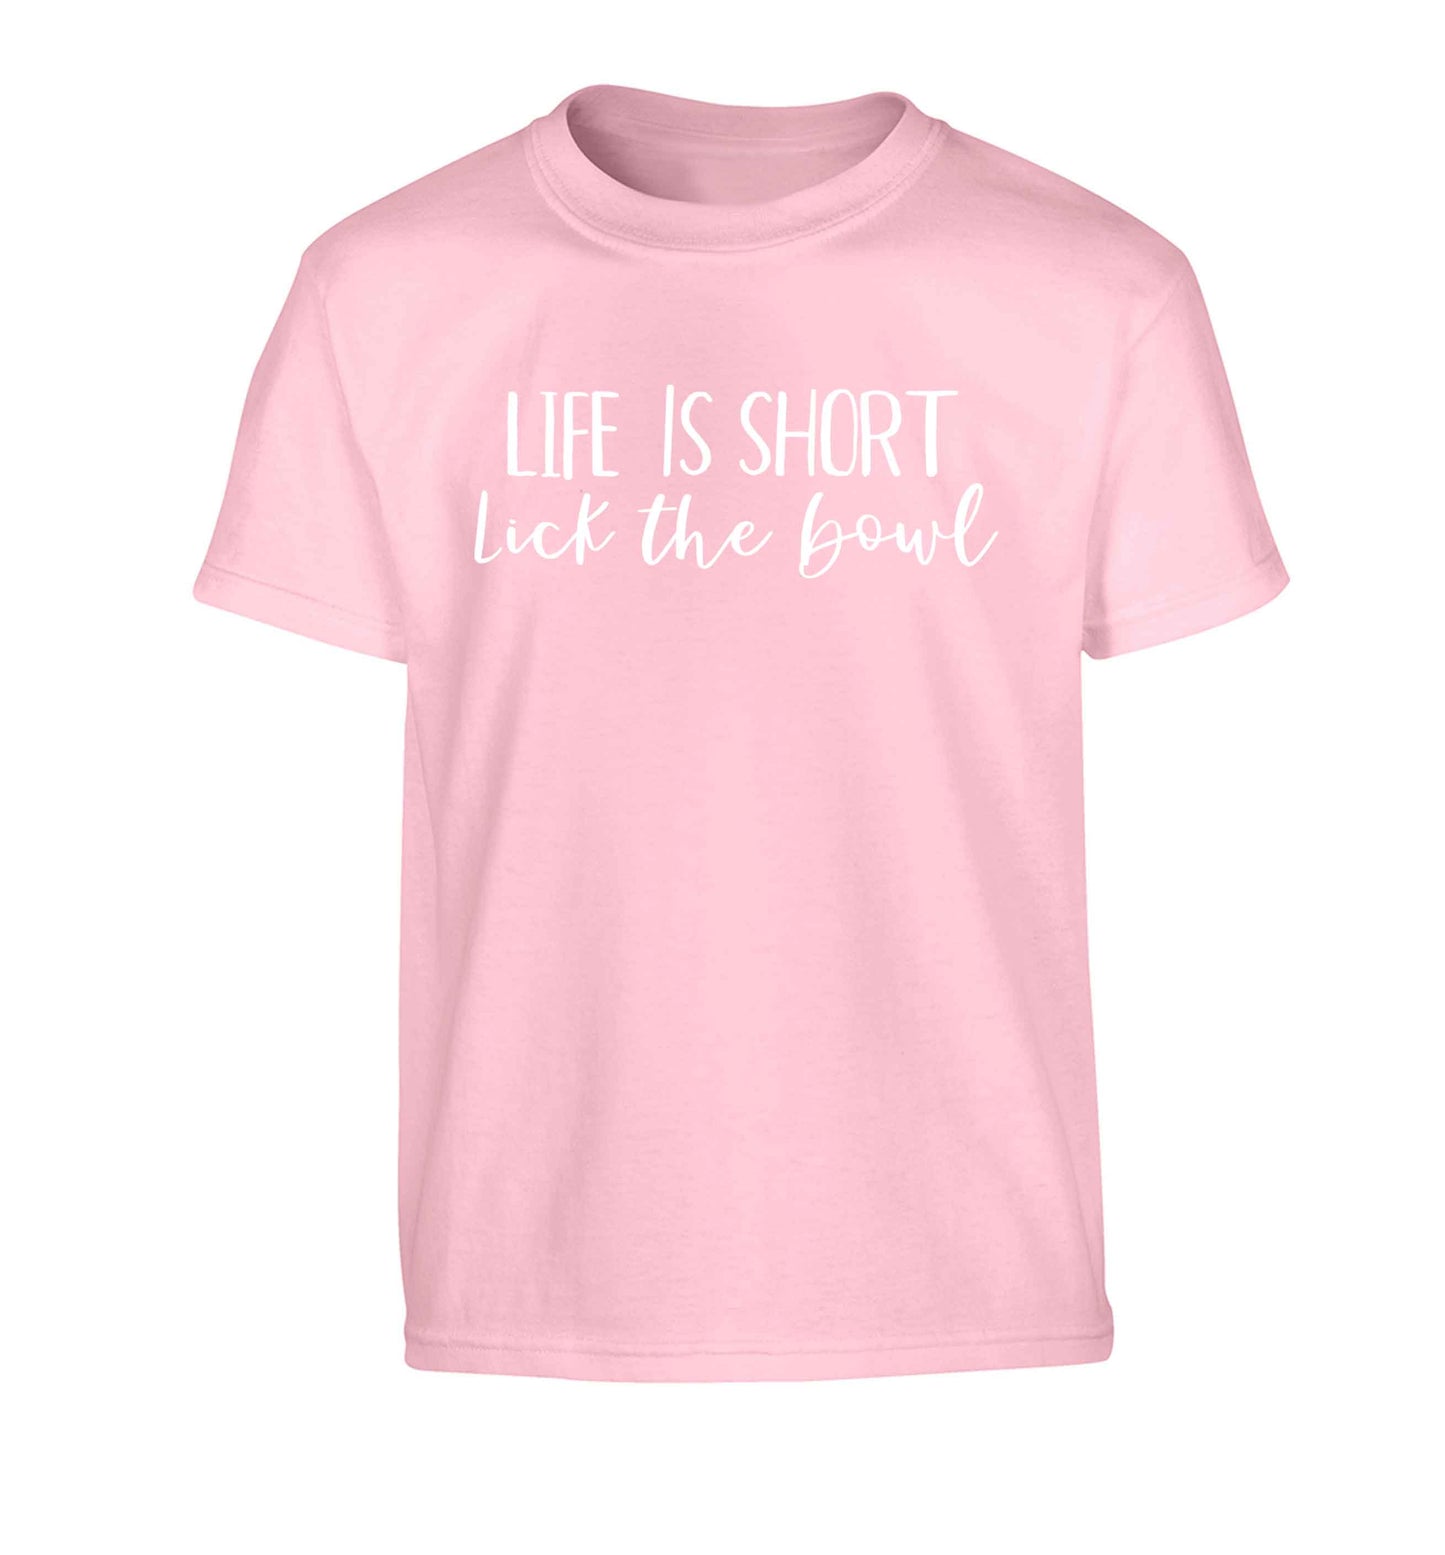 Life is short lick the bowl Children's light pink Tshirt 12-13 Years